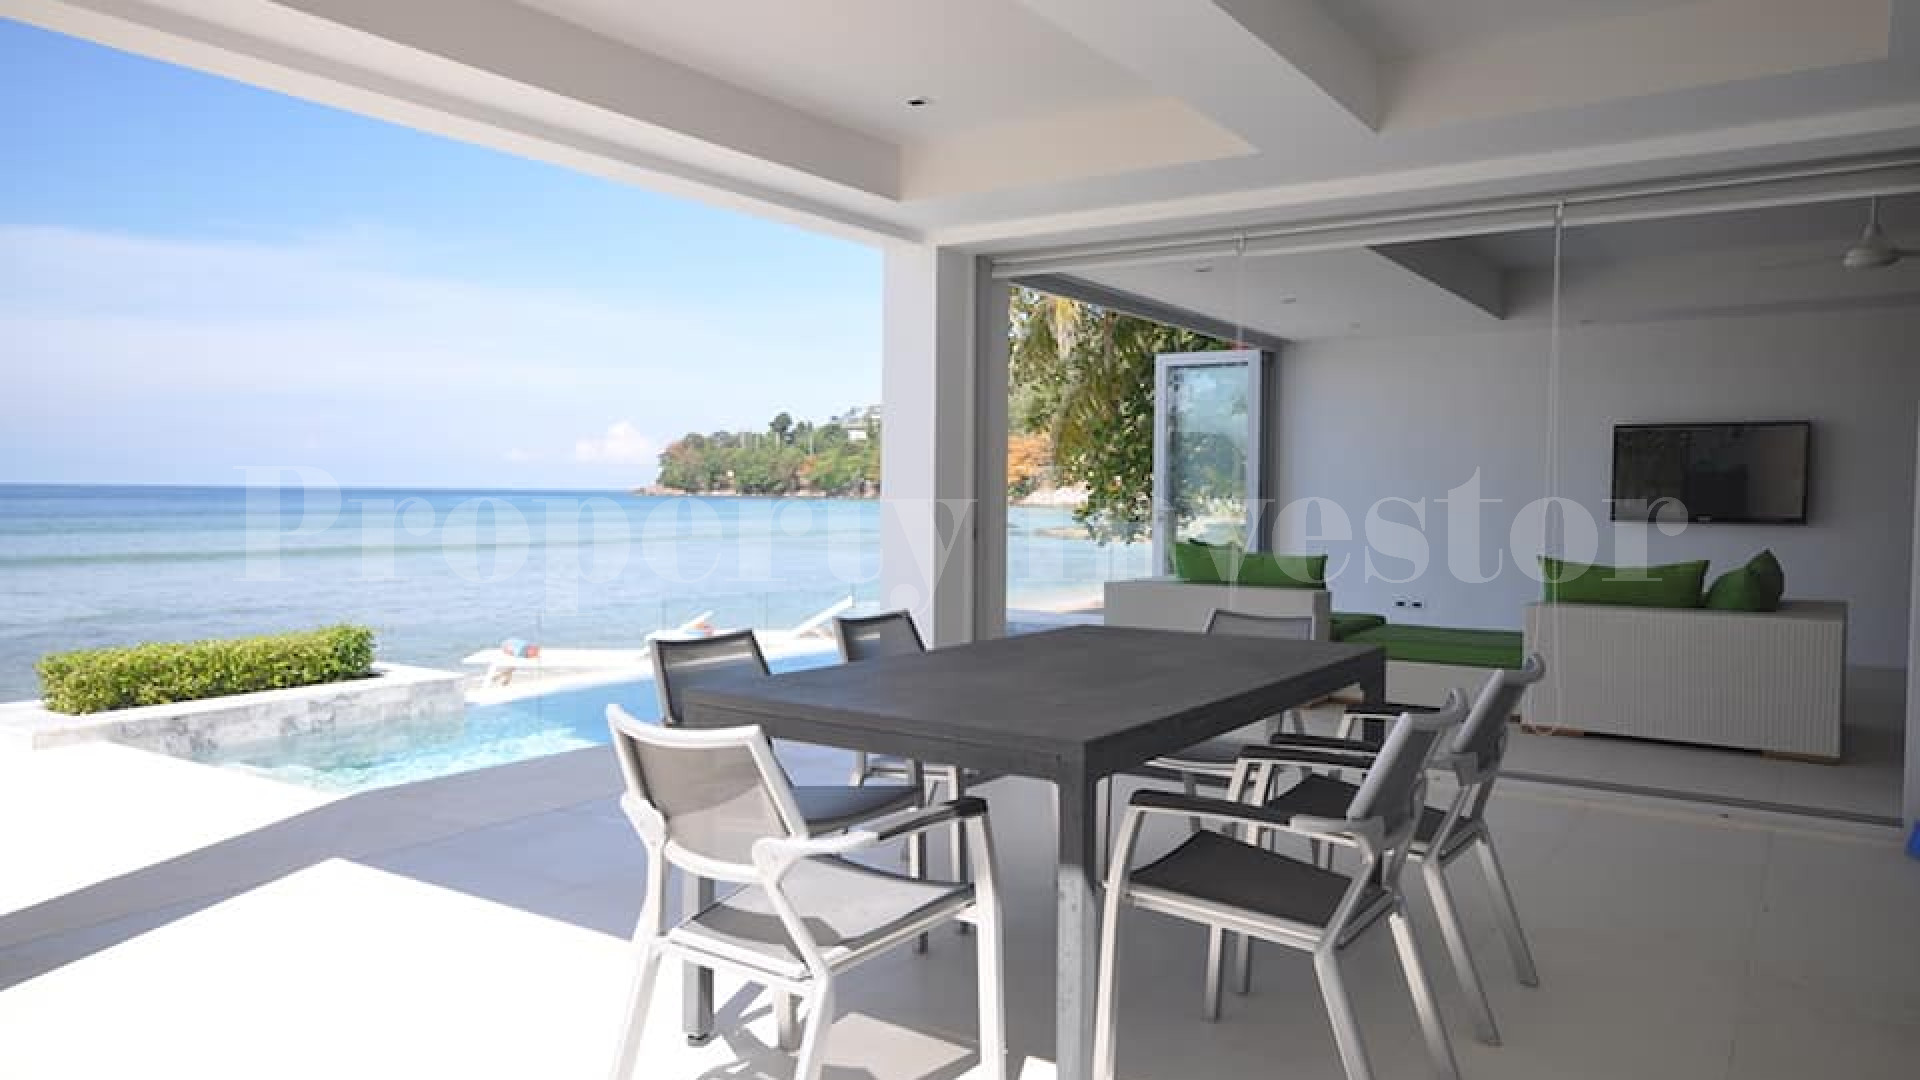 Very Rare Opportunity to Purchase 3 Bedroom Beach House on Patong Beach, Phuket